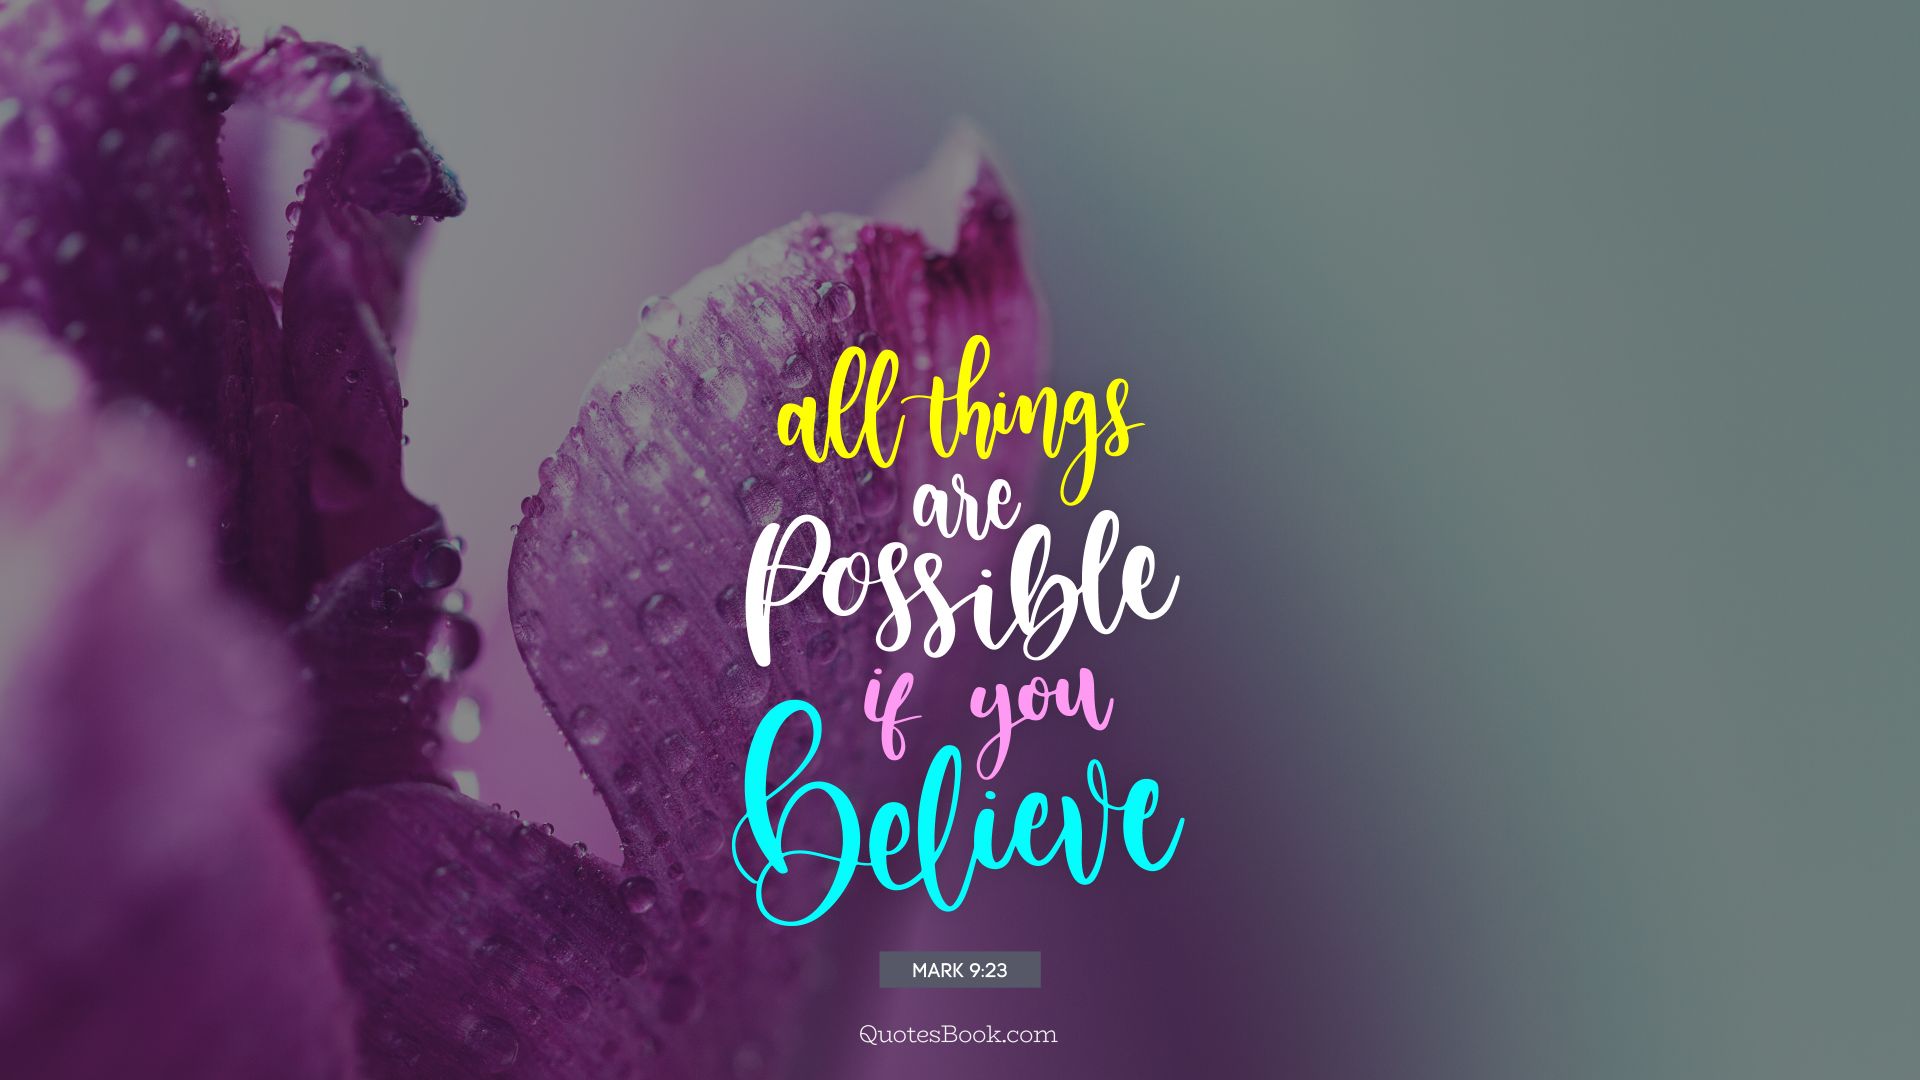 All things are possible if you believe. - Quote by Mark 9:23